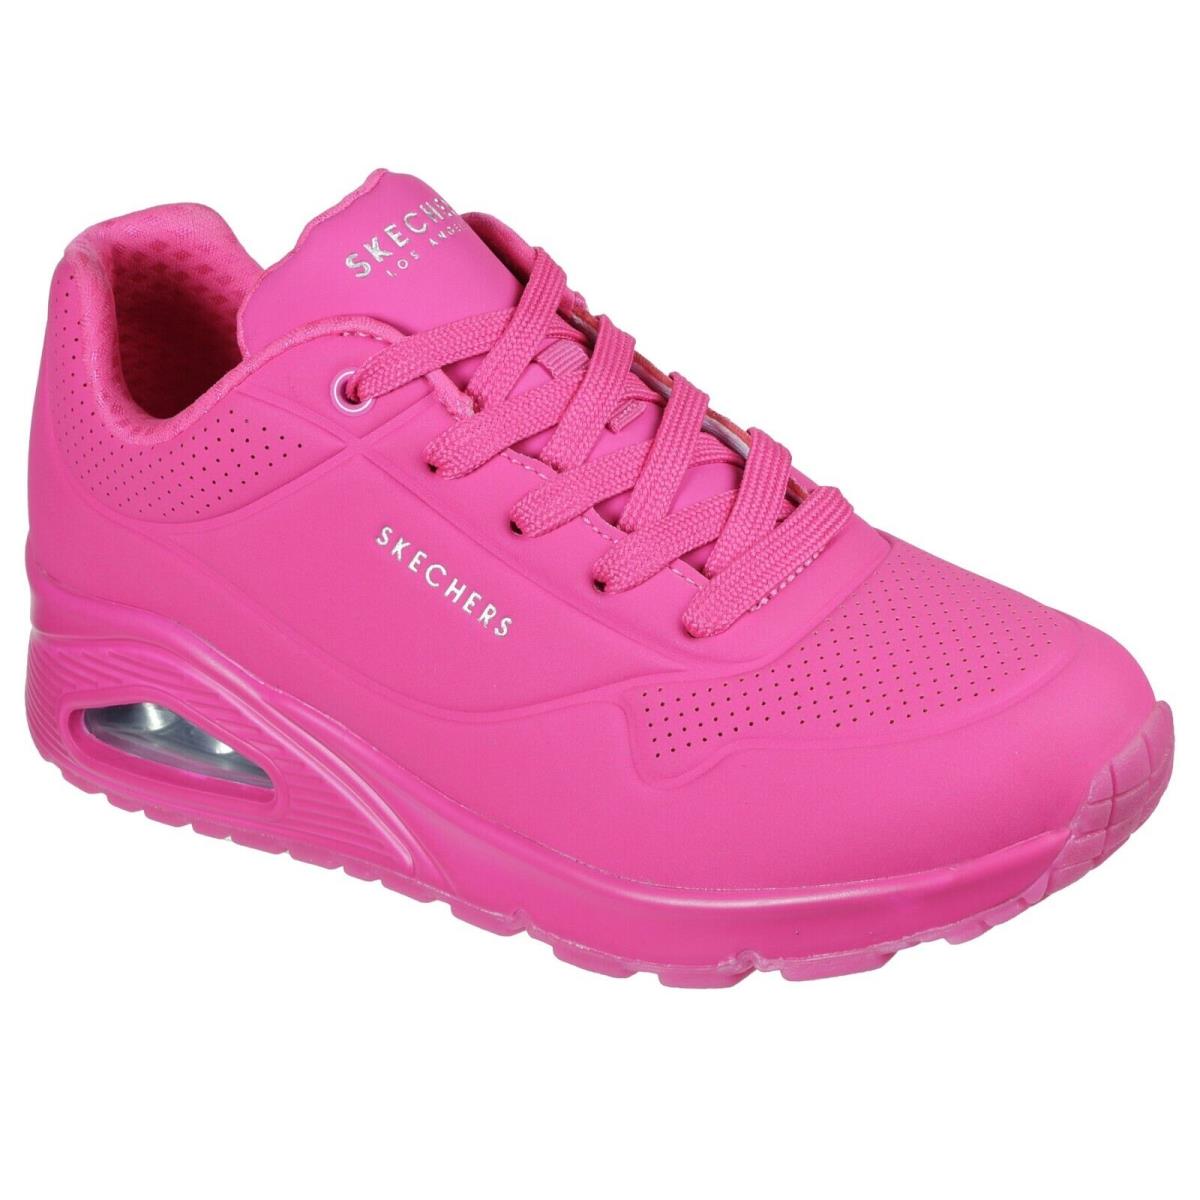 Women`s Skechers Uno Night Shades Casual Shoes 73667 /htpk Multi Sizes Hot Pink